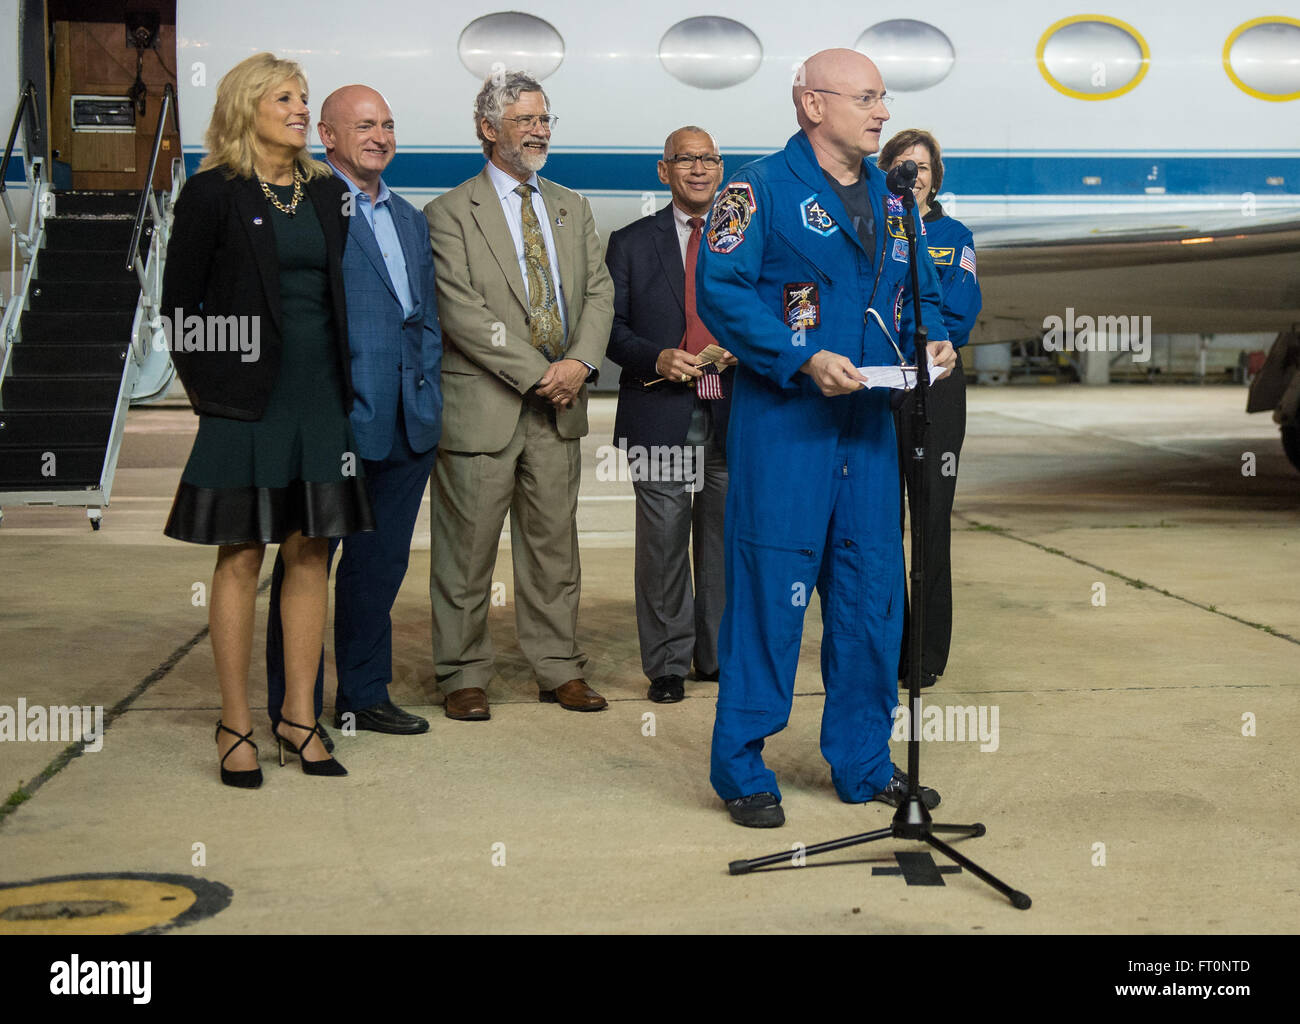 Dr. Jill Biden, wife of Vice President Joe Biden, left, Mark Kelly, former NASA astronaut and Scott Kelly's identical twin, second from left, Dr. John Holdren, director of the White House Office of Science and Technology Policy, third from left, NASA Administrator Charles Bolden, third from right, and Ellen Ochoa, director, NASA's Johnson Space Center, watch as Expedition 46 Commander Scott Kelly of NASA speaks at Ellington Field, Thursday, March 3, 2016 in Houston, Texas after his return to Earth. Kelly and Flight Engineers Mikhail Kornienko and Sergey Volkov of Roscosmos landed in their Soyu Stock Photo